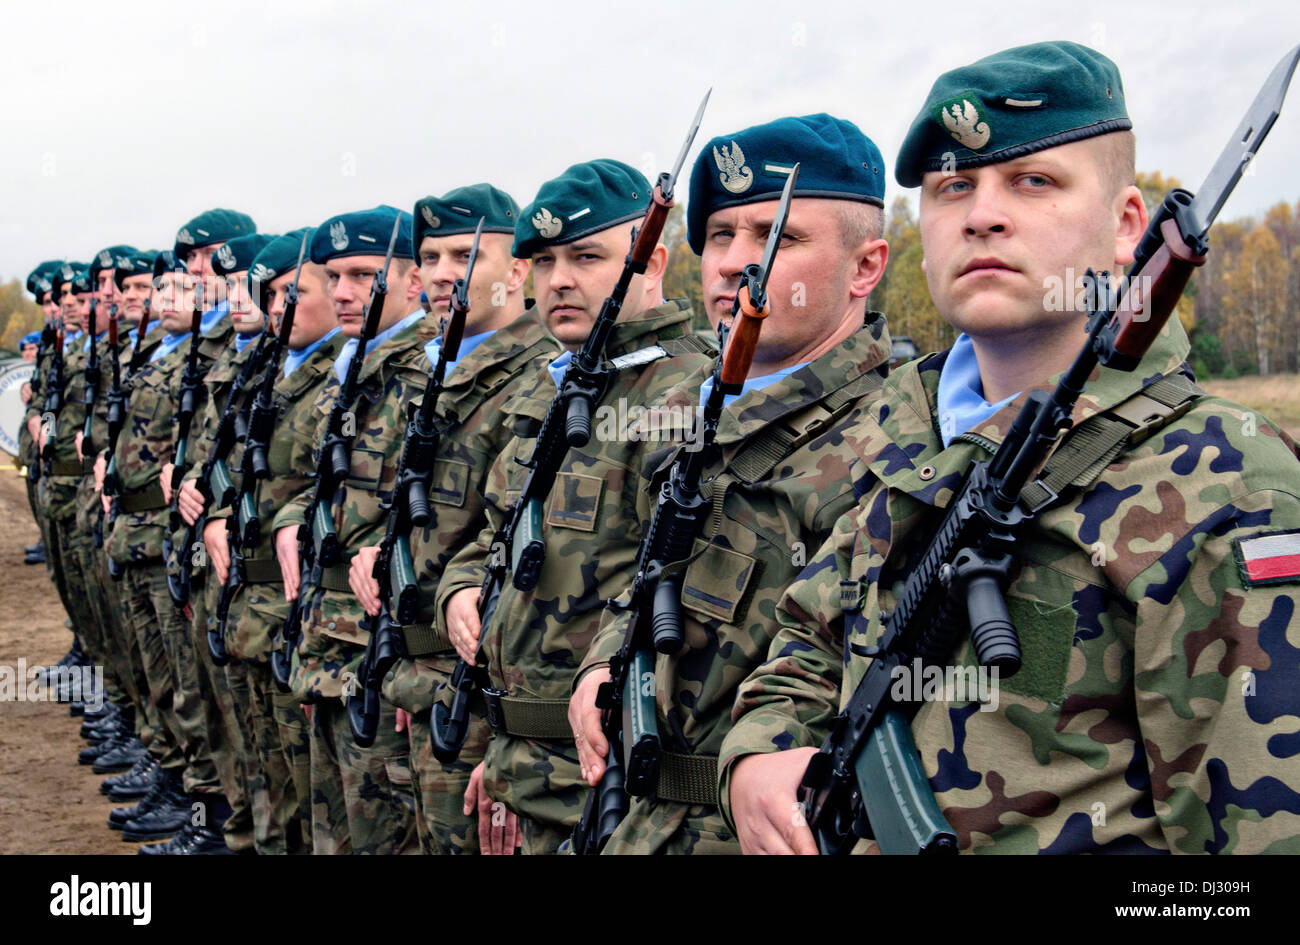 A Polish army honor guard stands in formation during a ceremony October 27, 2013 in Drawsko Pomorskie, Poland. Stock Photo